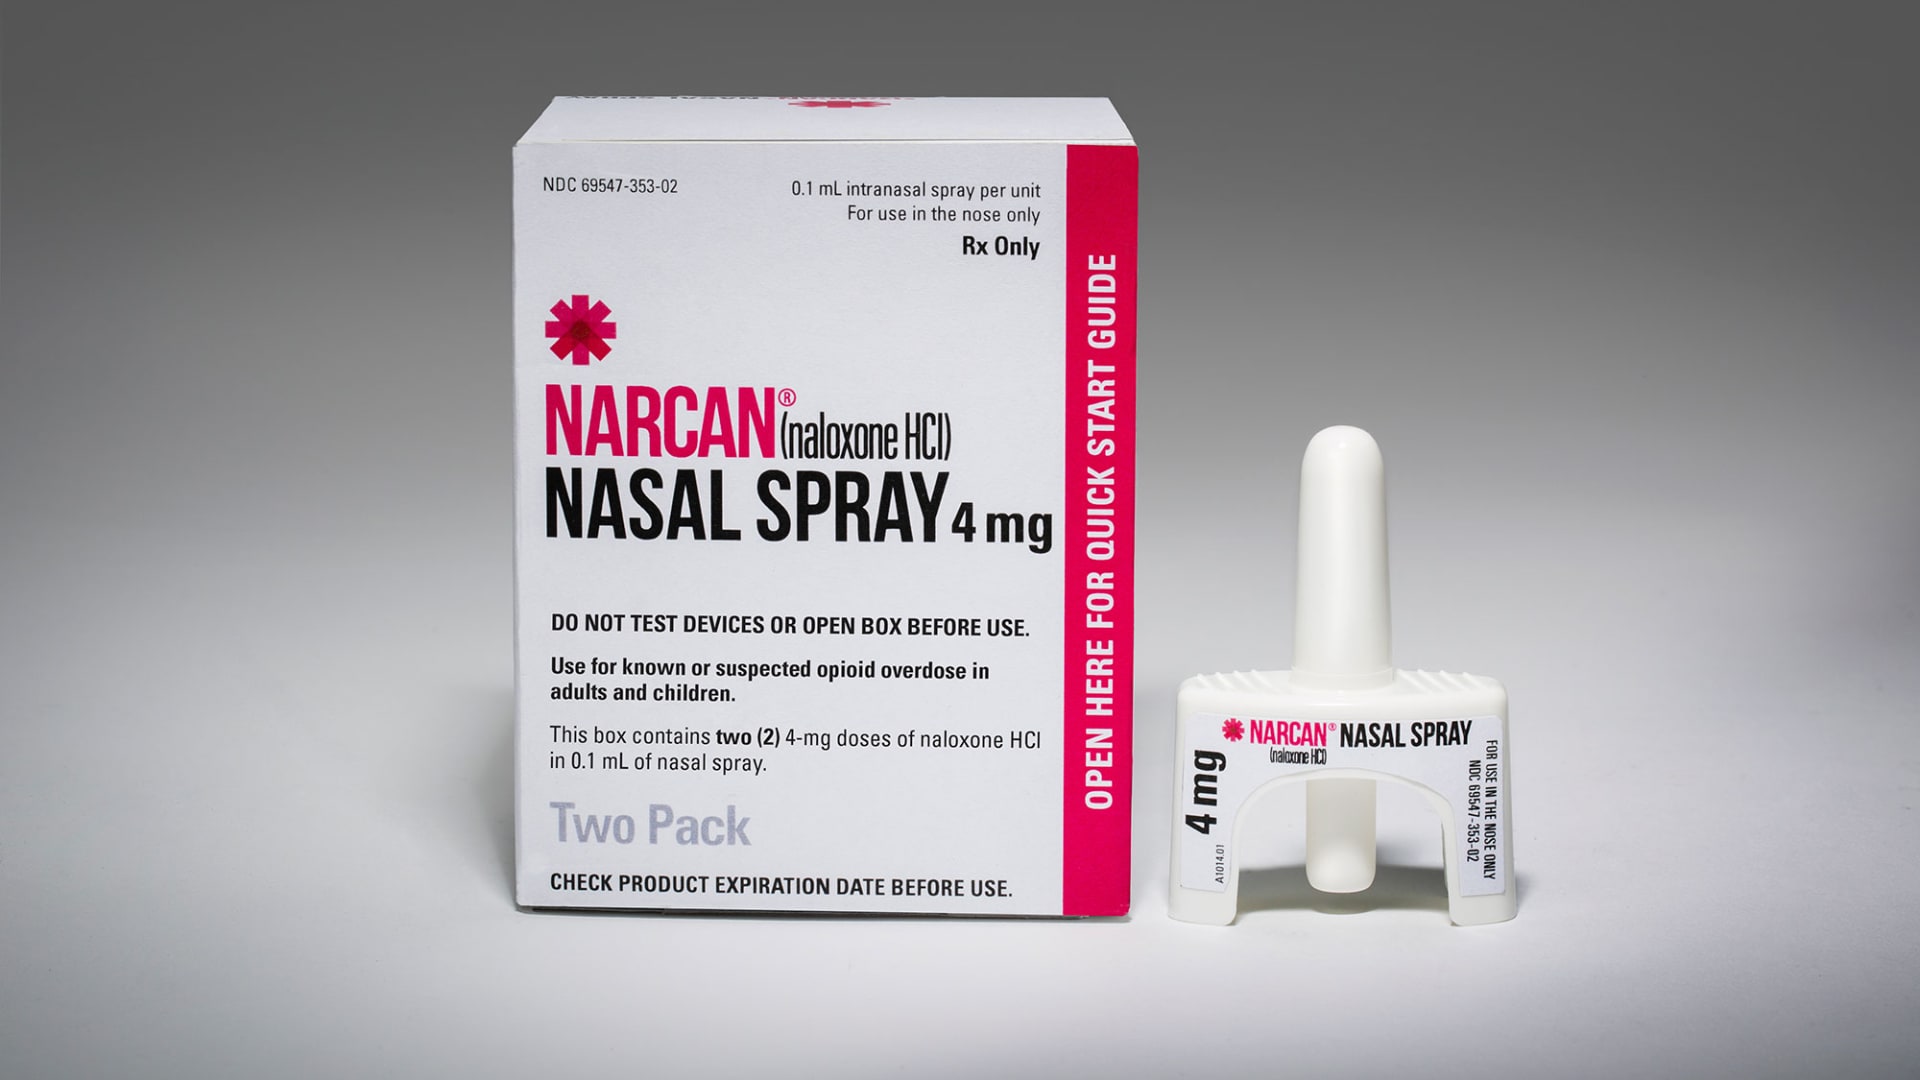 FDA advisors advocate over-the-counter use of lifesaving opioid overdose therapy Narcan